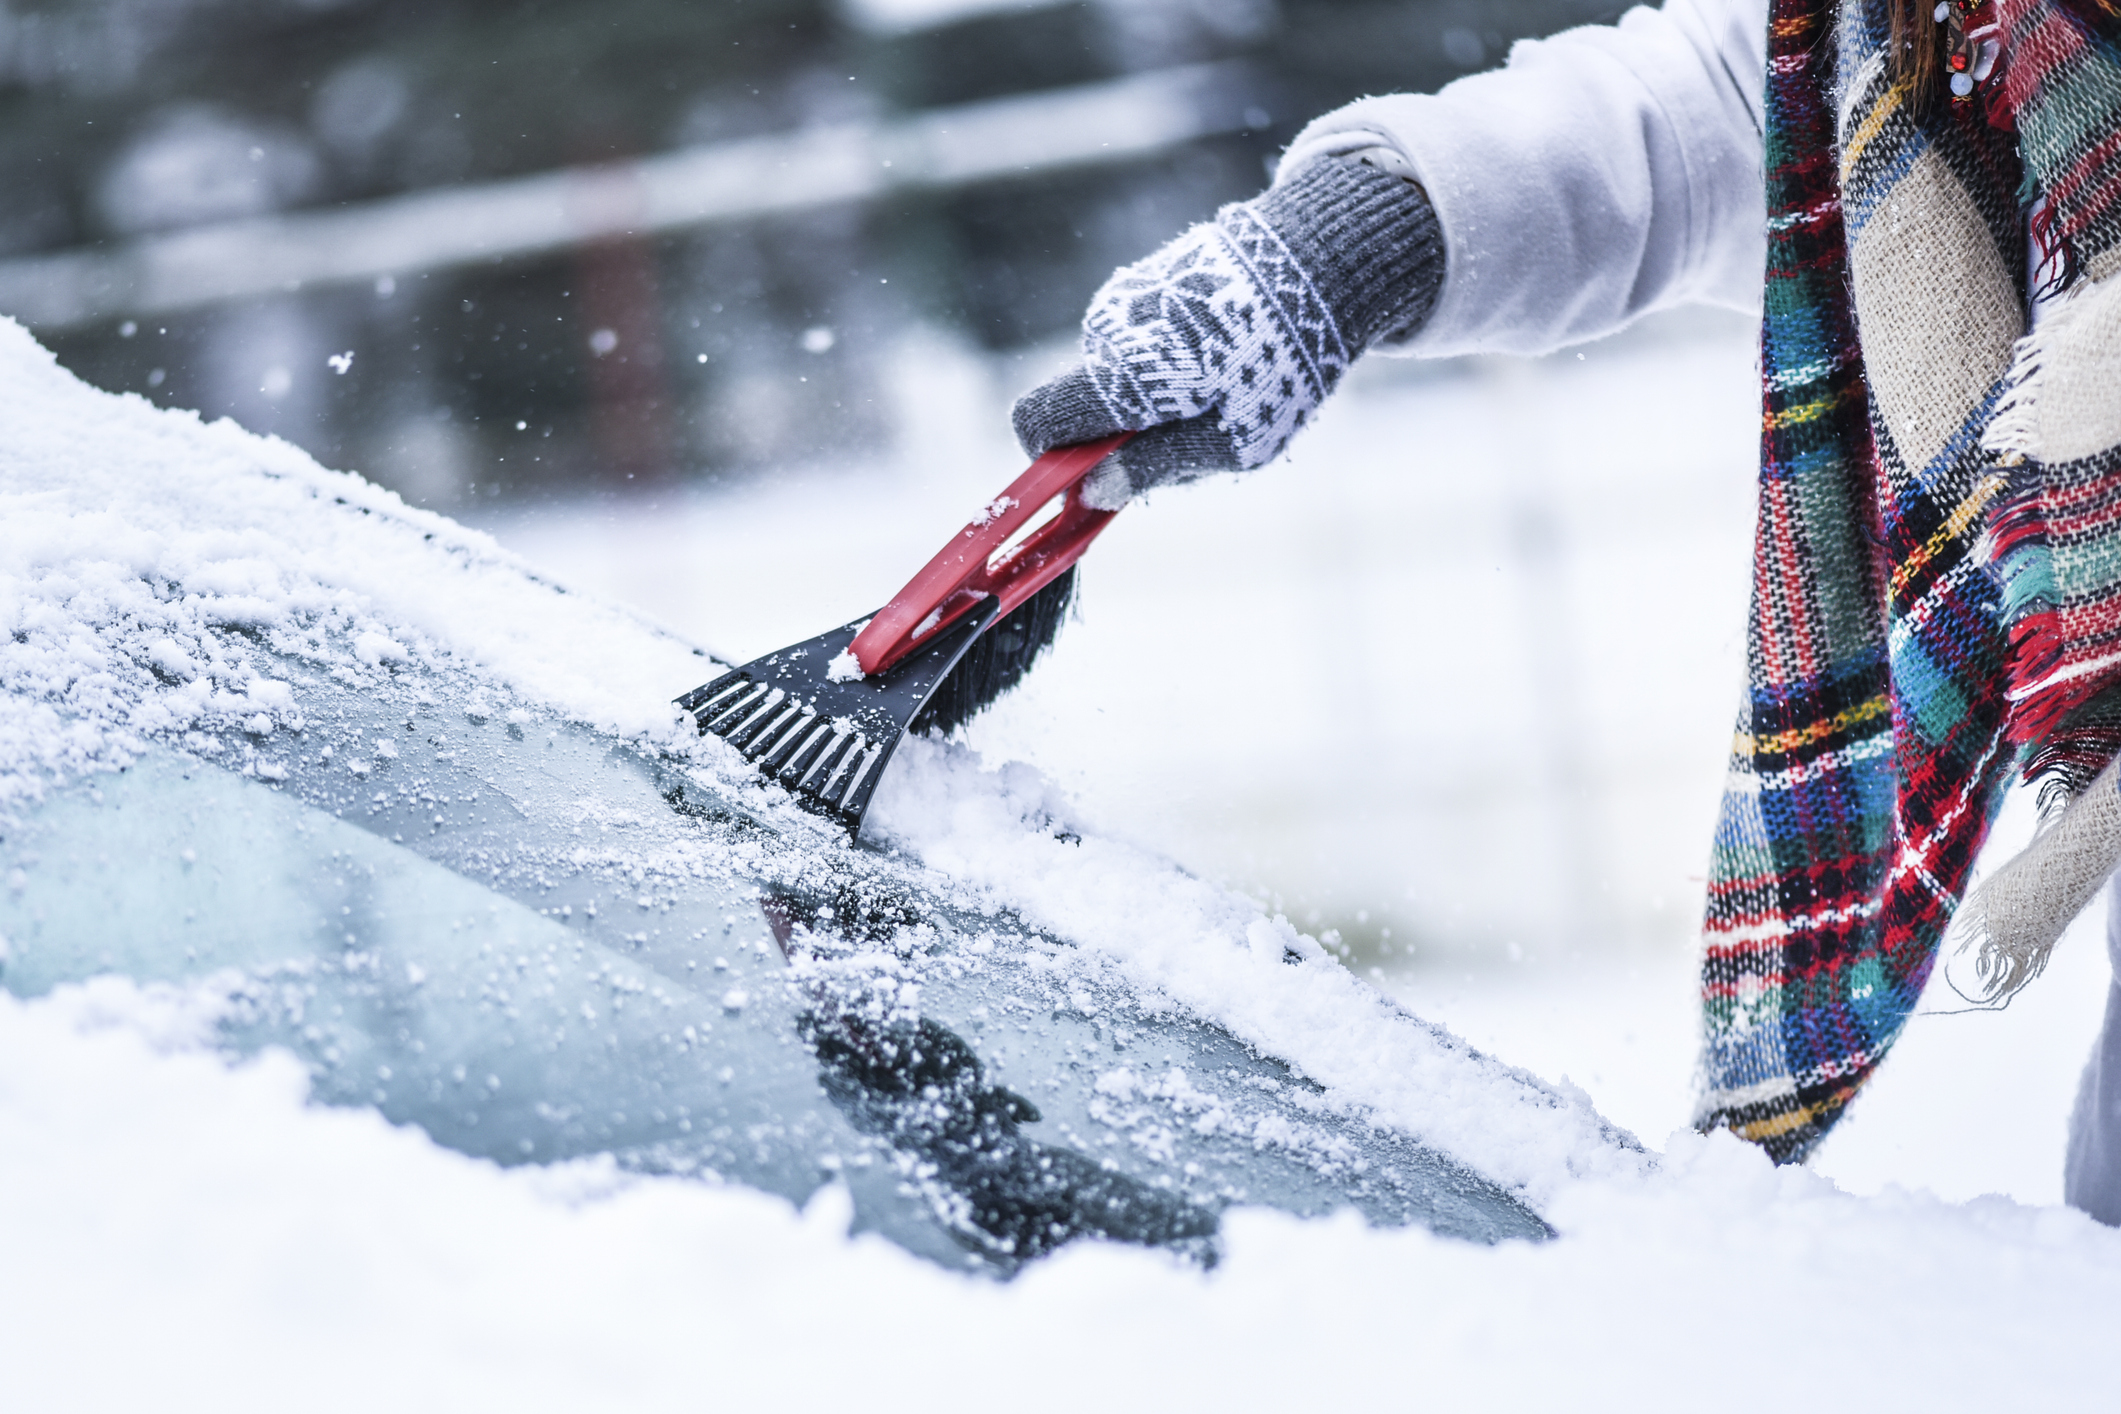 How to Take Care of Your Windshield During the Winter